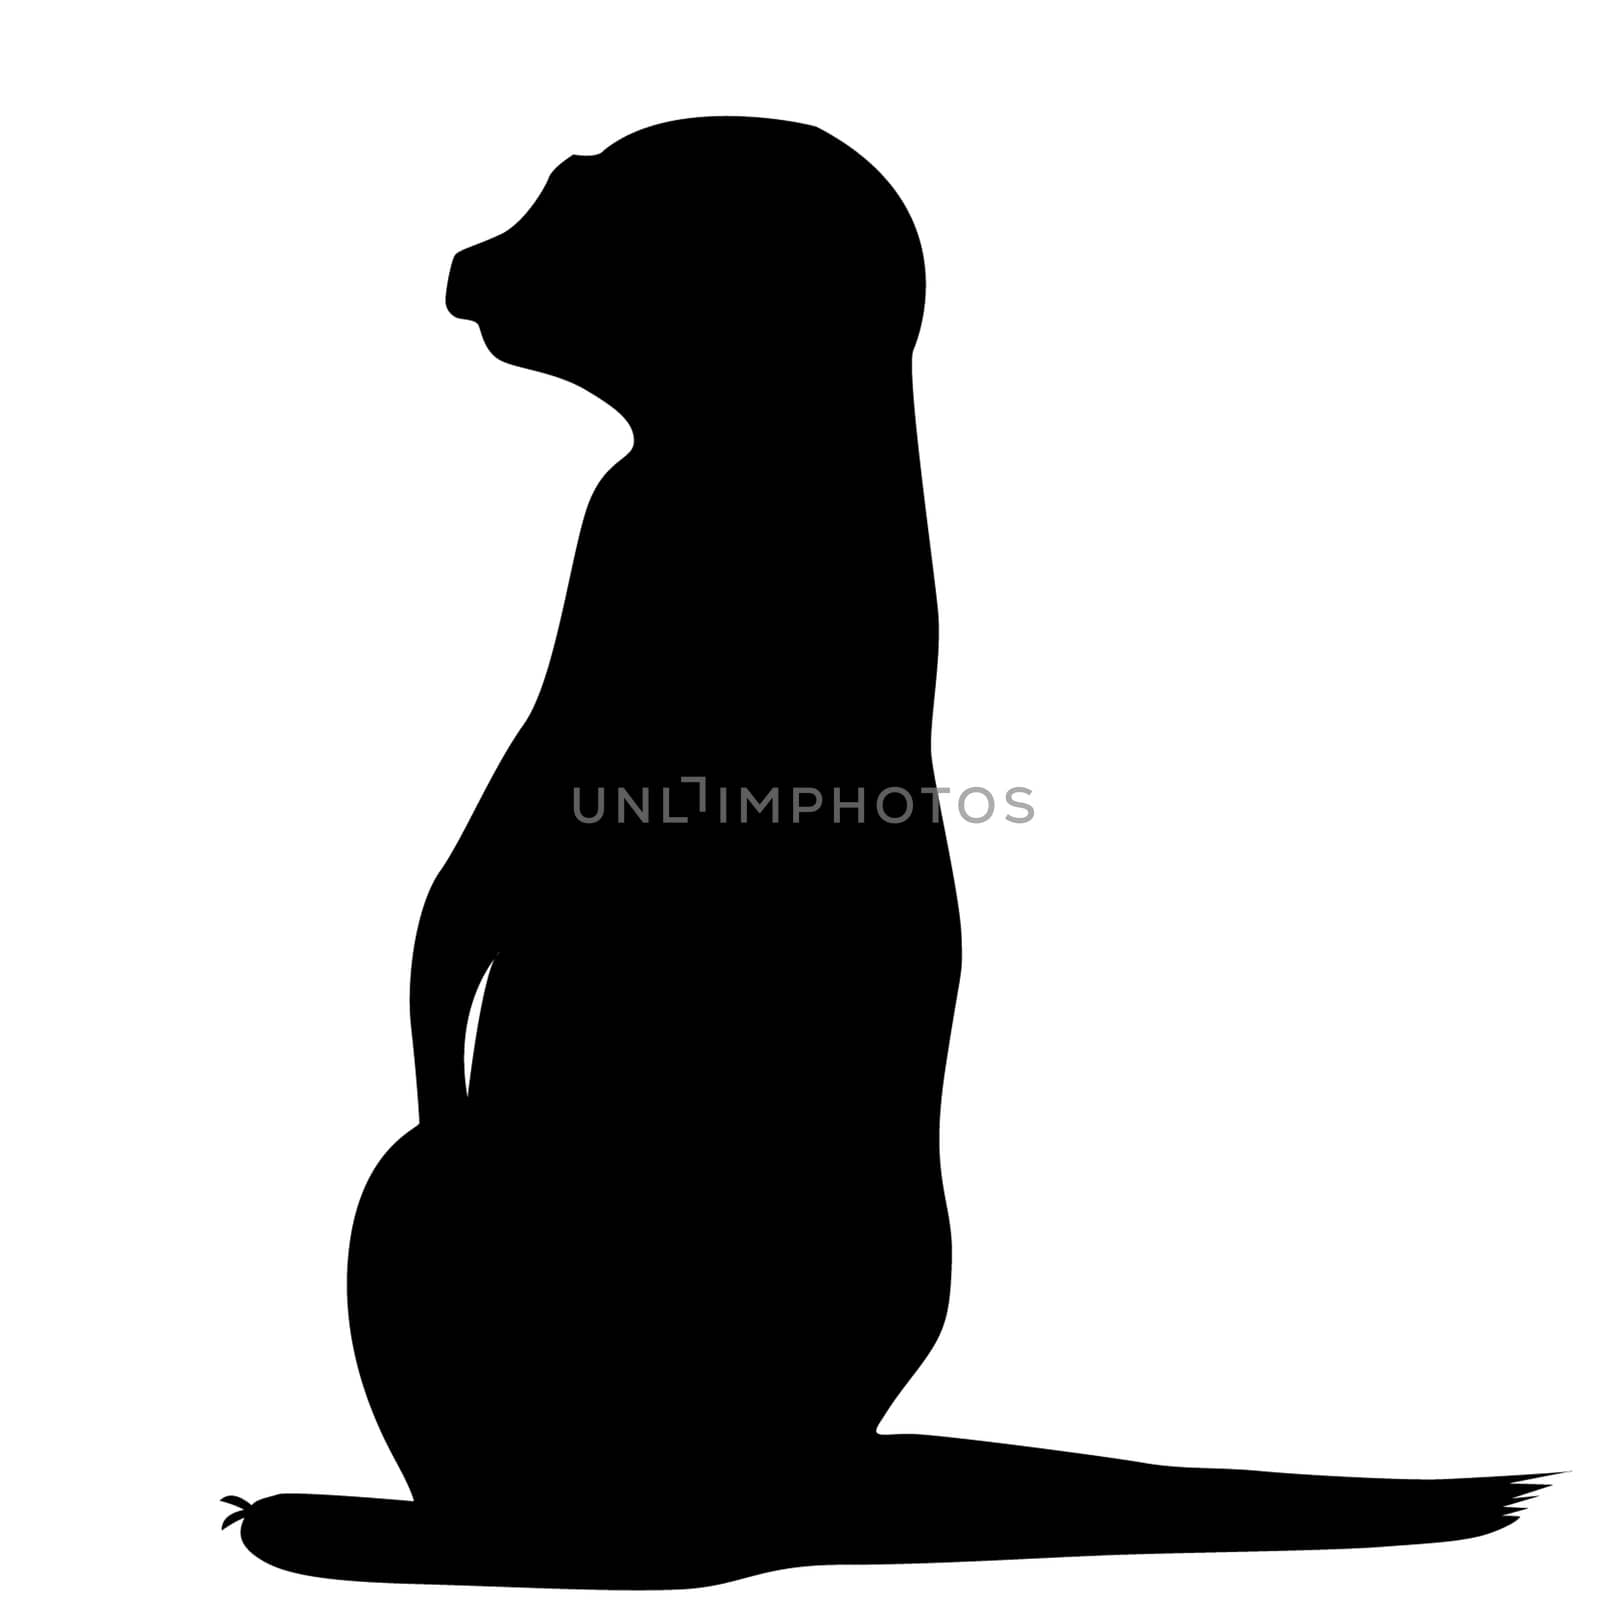 Meerkat silhouette isolated on white background by hibrida13